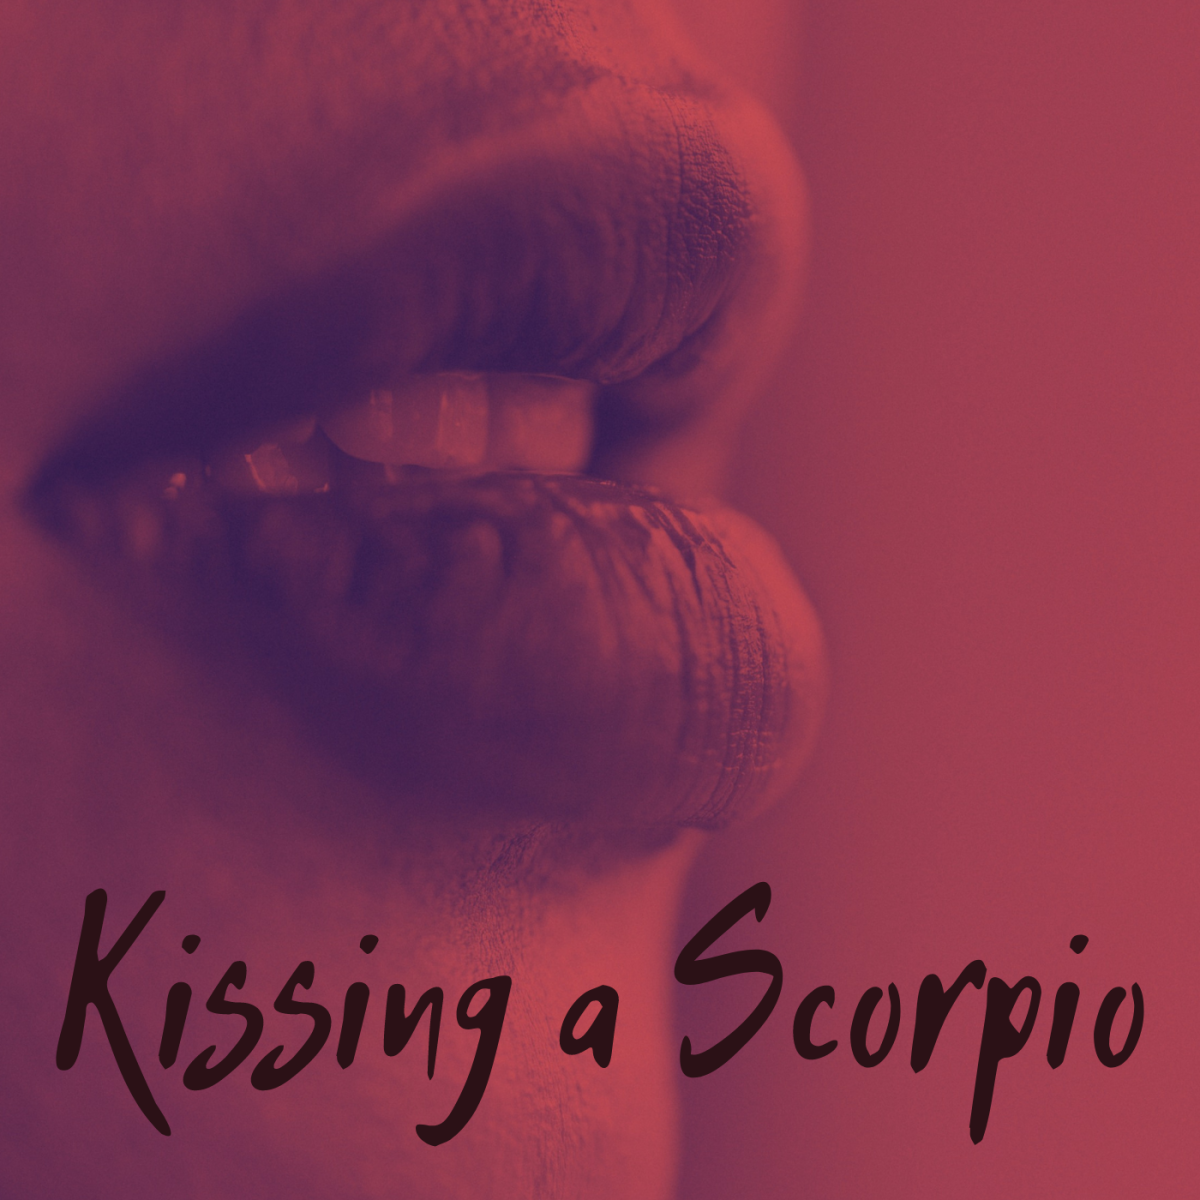 Scorpios have a reputation for being excellent kissers. Is it deserved?